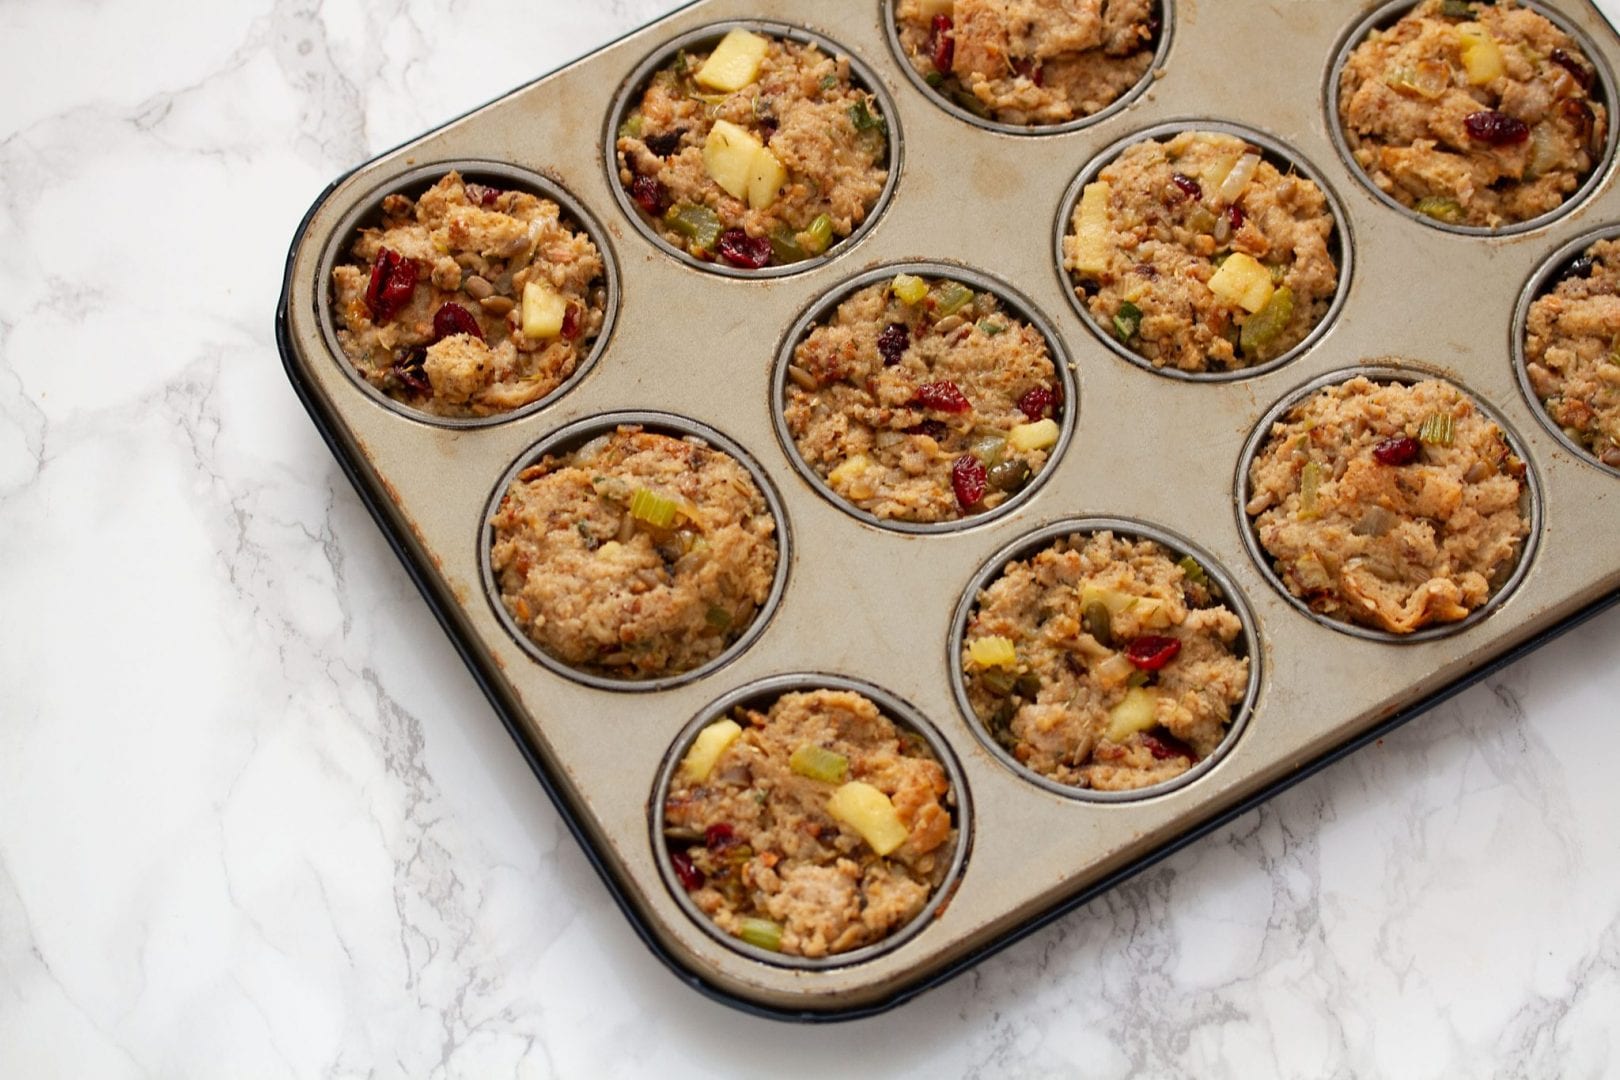 Stuffing recipes - Sausage and Apple Stuffing Muffins - Thanksgiving recipes - Christmas recipes